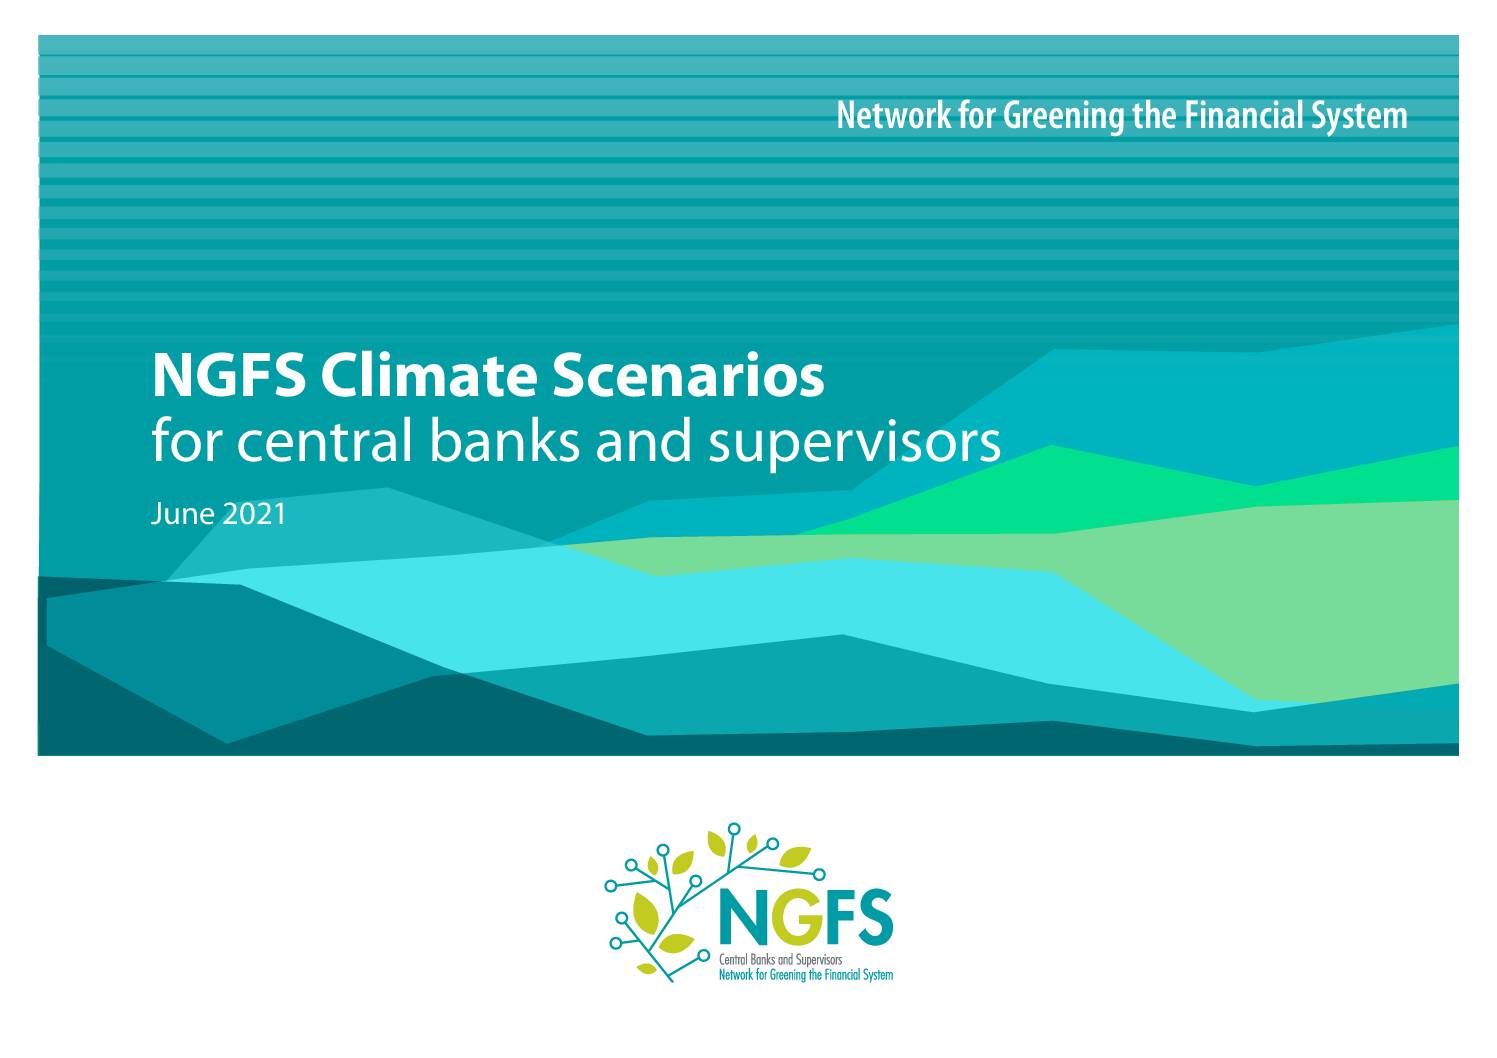 NGFS Climate Scenarios for Central Banks and Supervisors